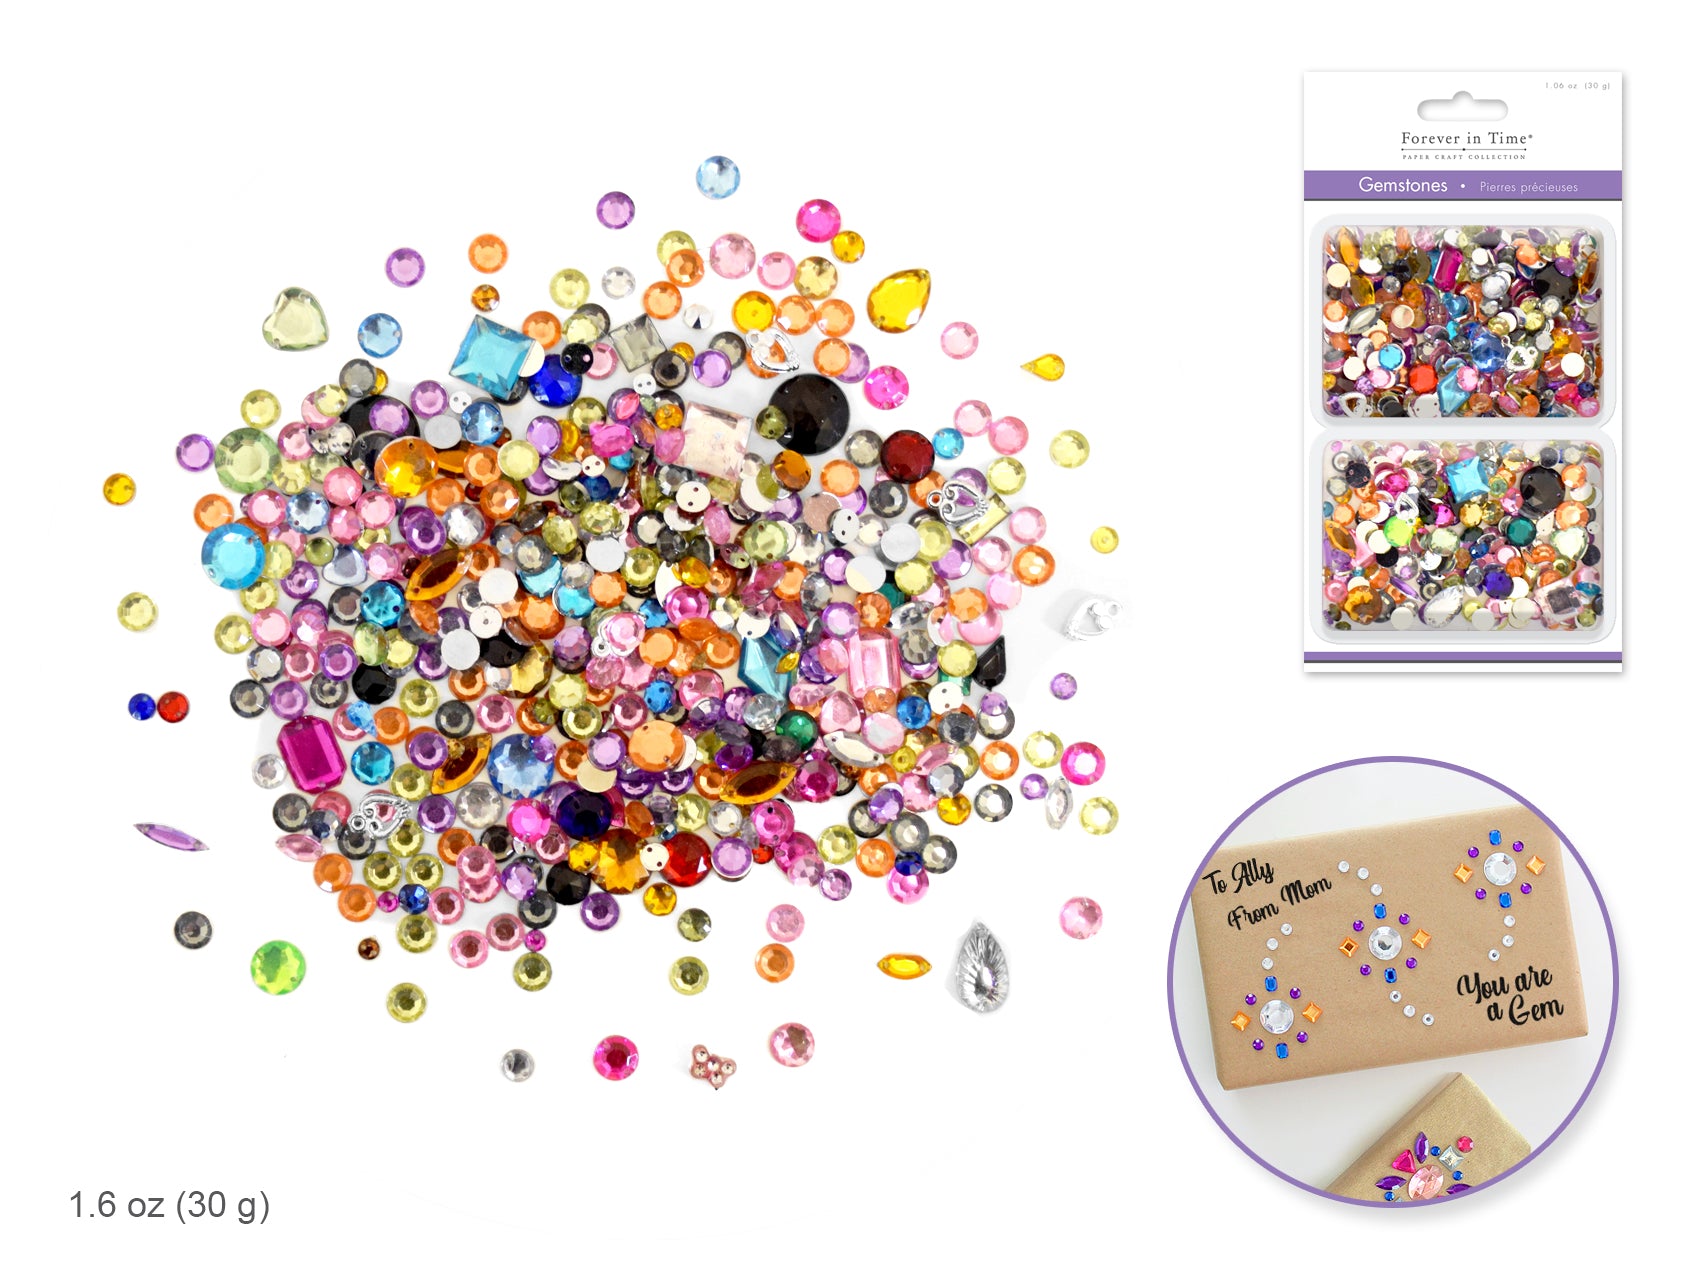 Gemstone Assorted Shapes, Colors, and Sizes Paper Craft Embellishments, 30g